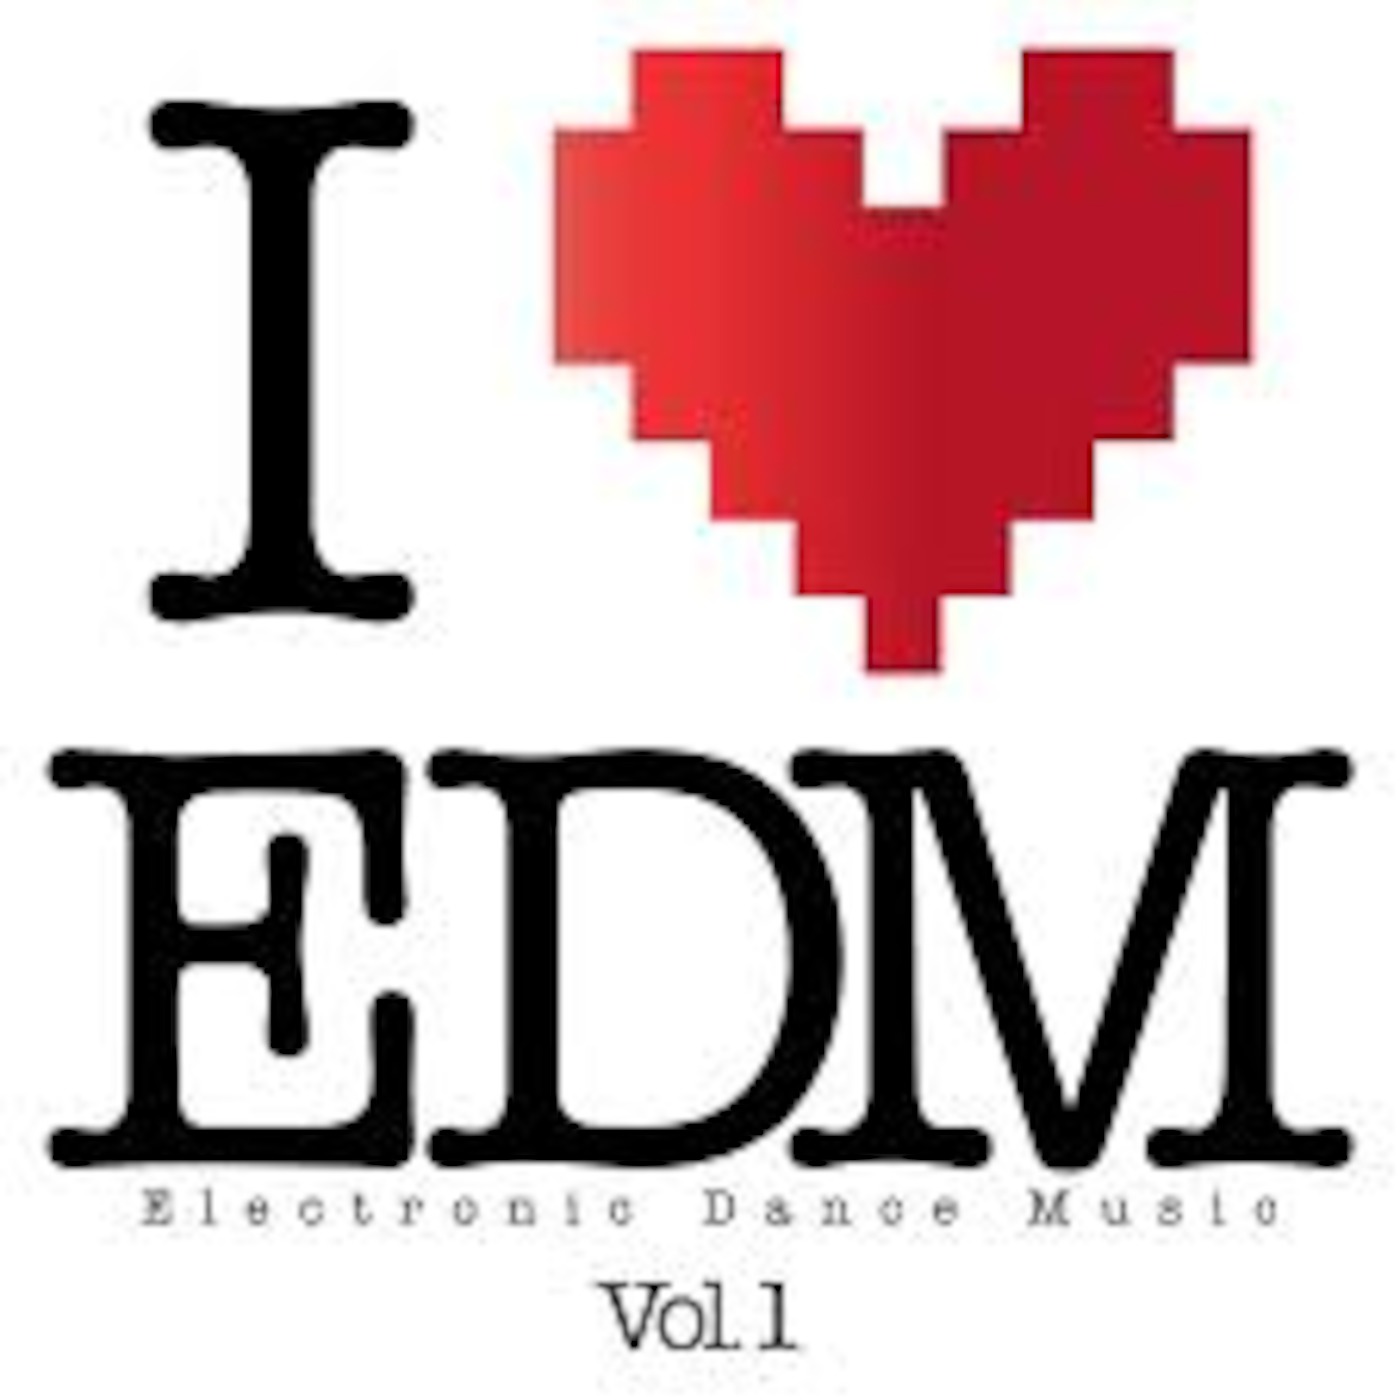 Dance with EDM # 2